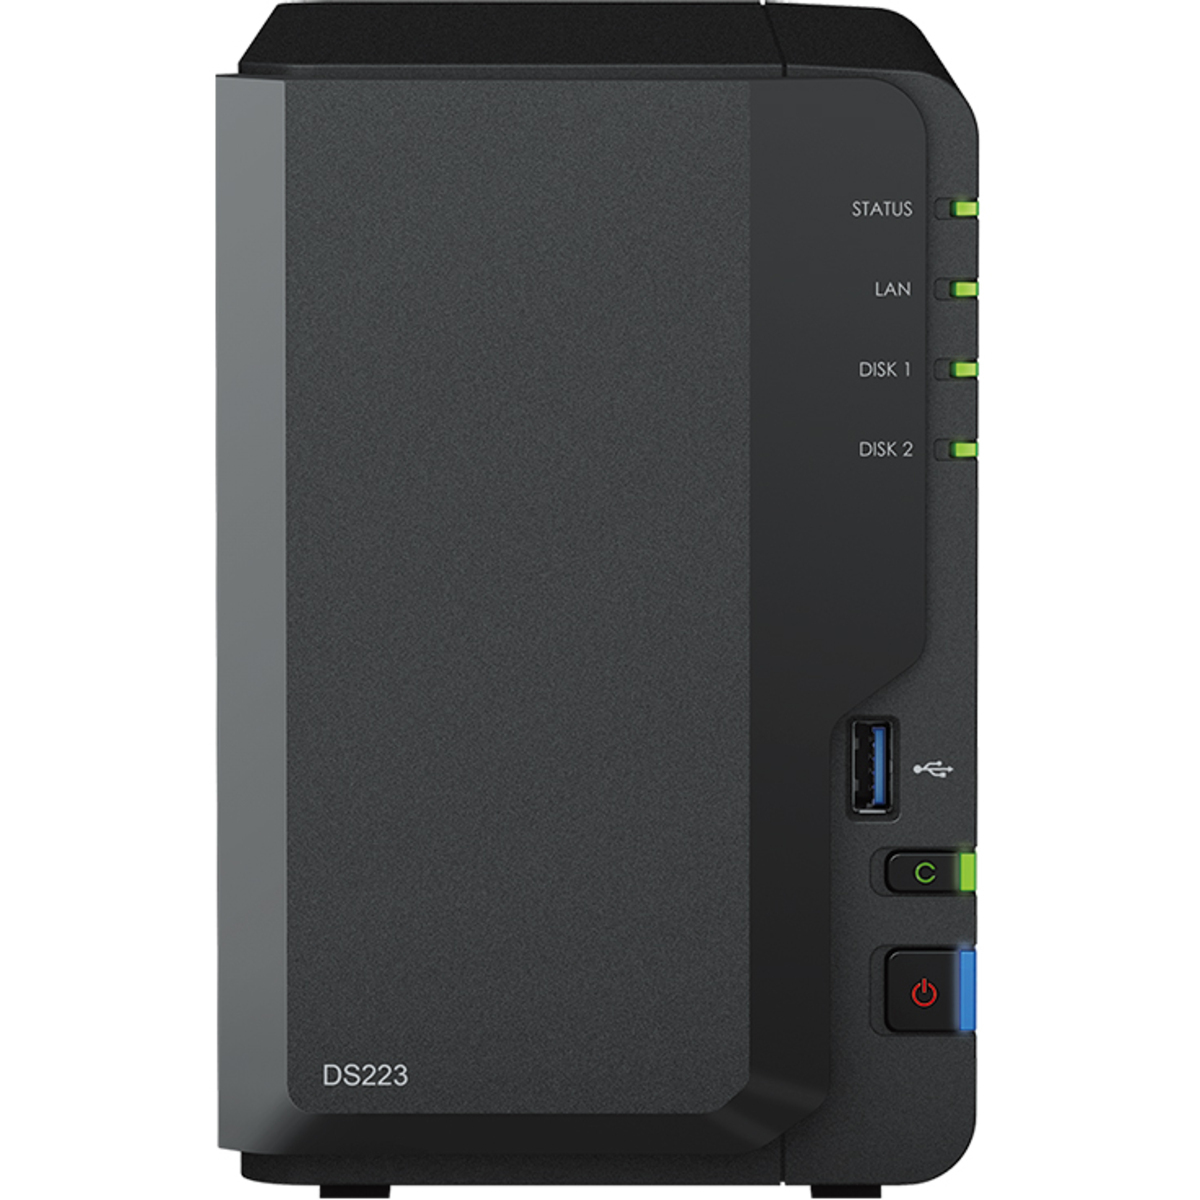 Synology DiskStation DS223 20tb 2-Bay Desktop Personal / Basic Home / Small Office NAS - Network Attached Storage Device 1x20tb Western Digital Gold WD202KRYZ 3.5 7200rpm SATA 6Gb/s HDD ENTERPRISE Class Drives Installed - Burn-In Tested DiskStation DS223